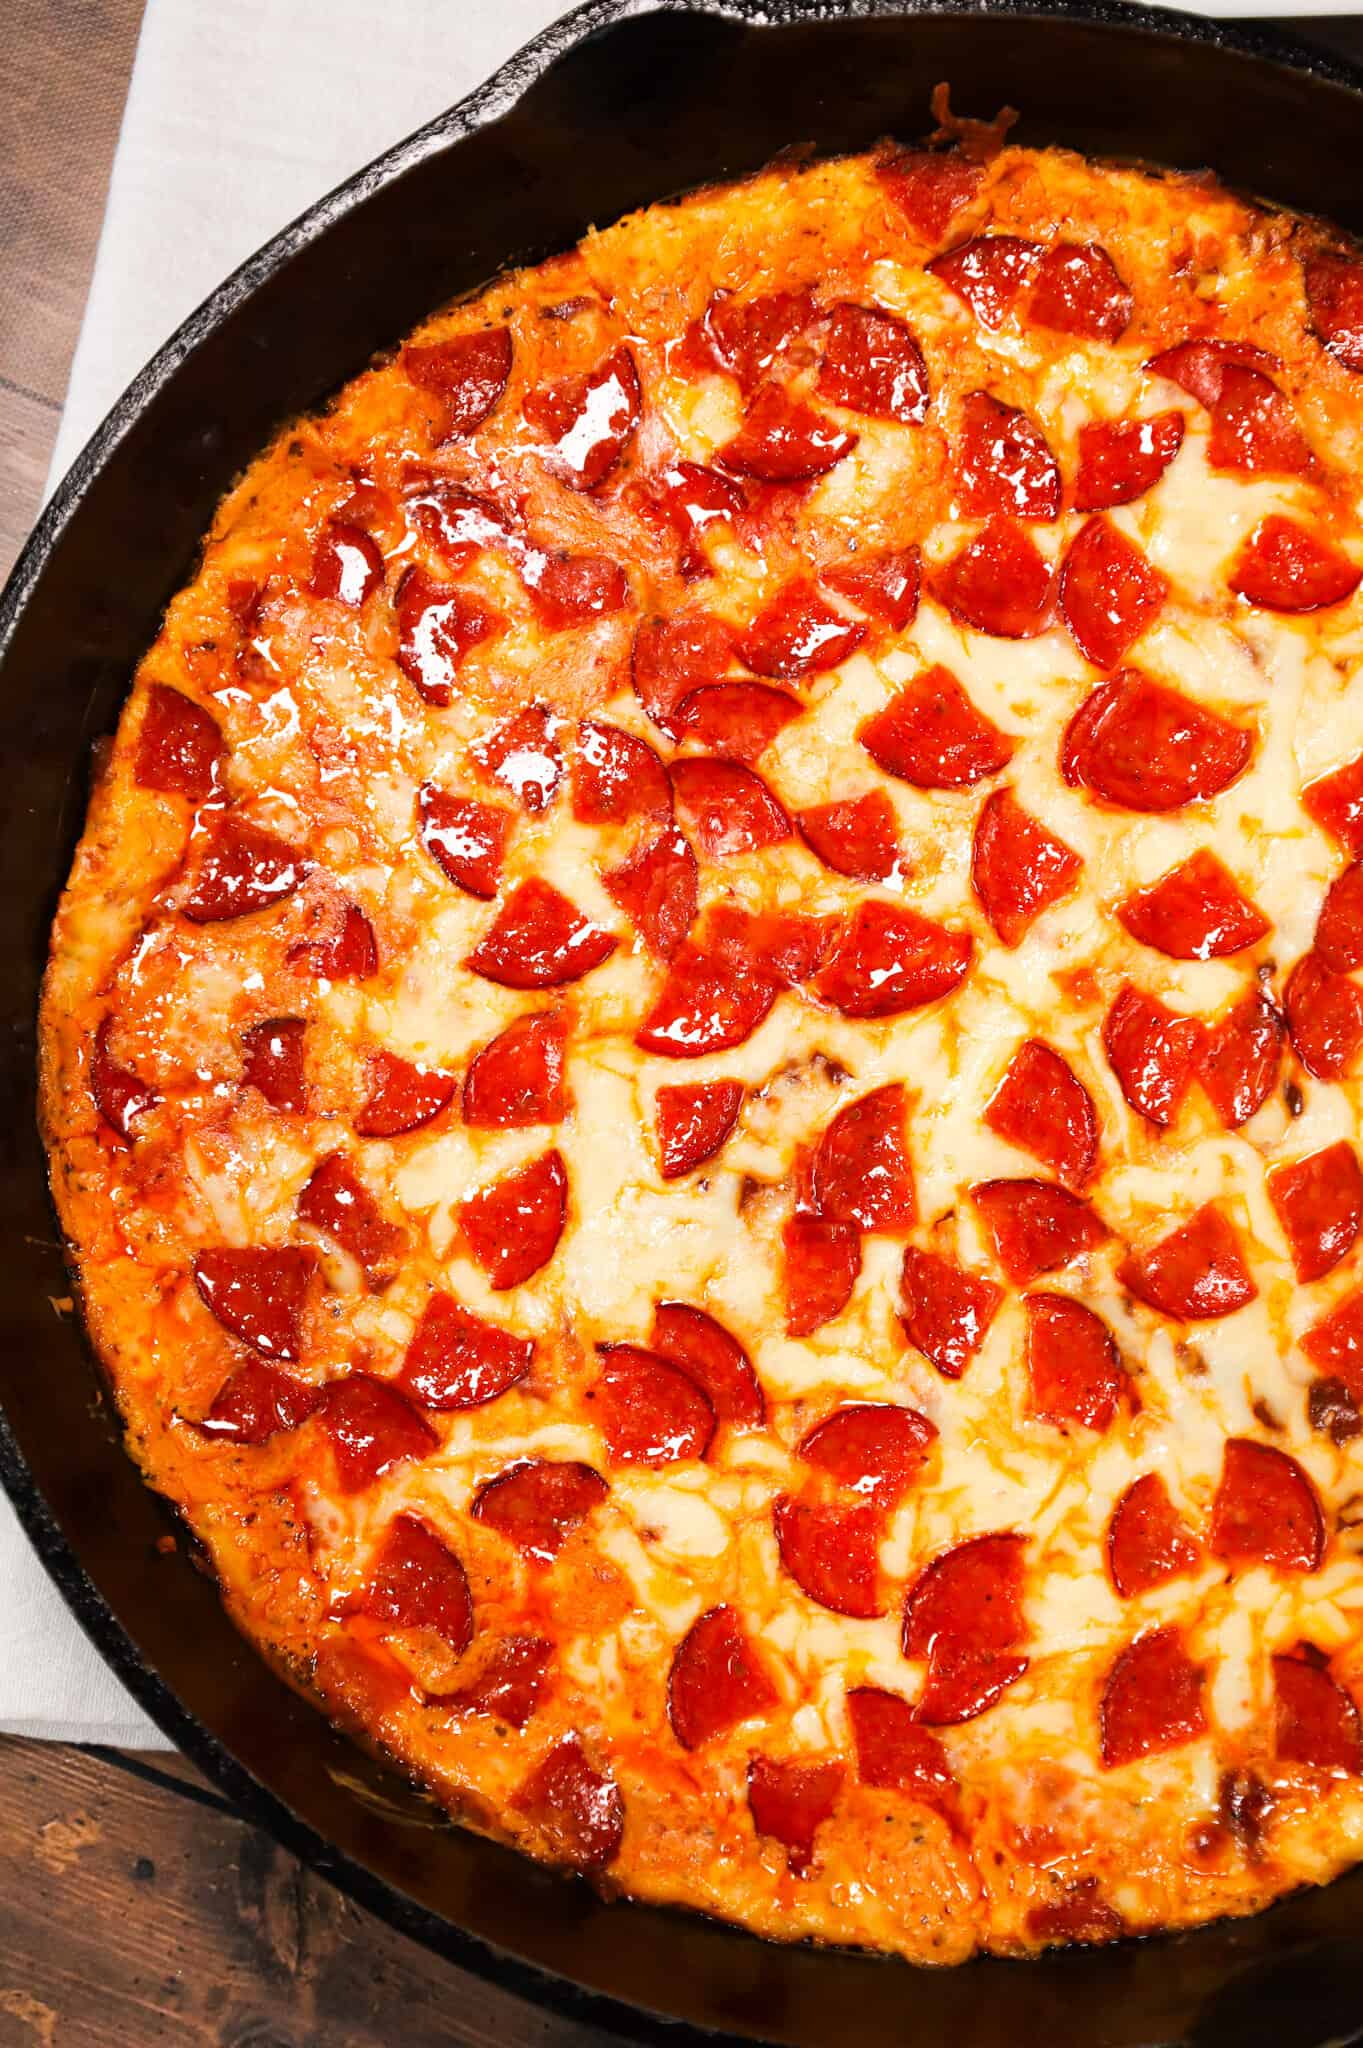 Pepperoni Dip is a delicious hot dip recipe made with cream cheese, ranch dressing, Italian seasoning, pizza sauce, mozzarella cheese, parmesan cheese and chopped pepperoni.